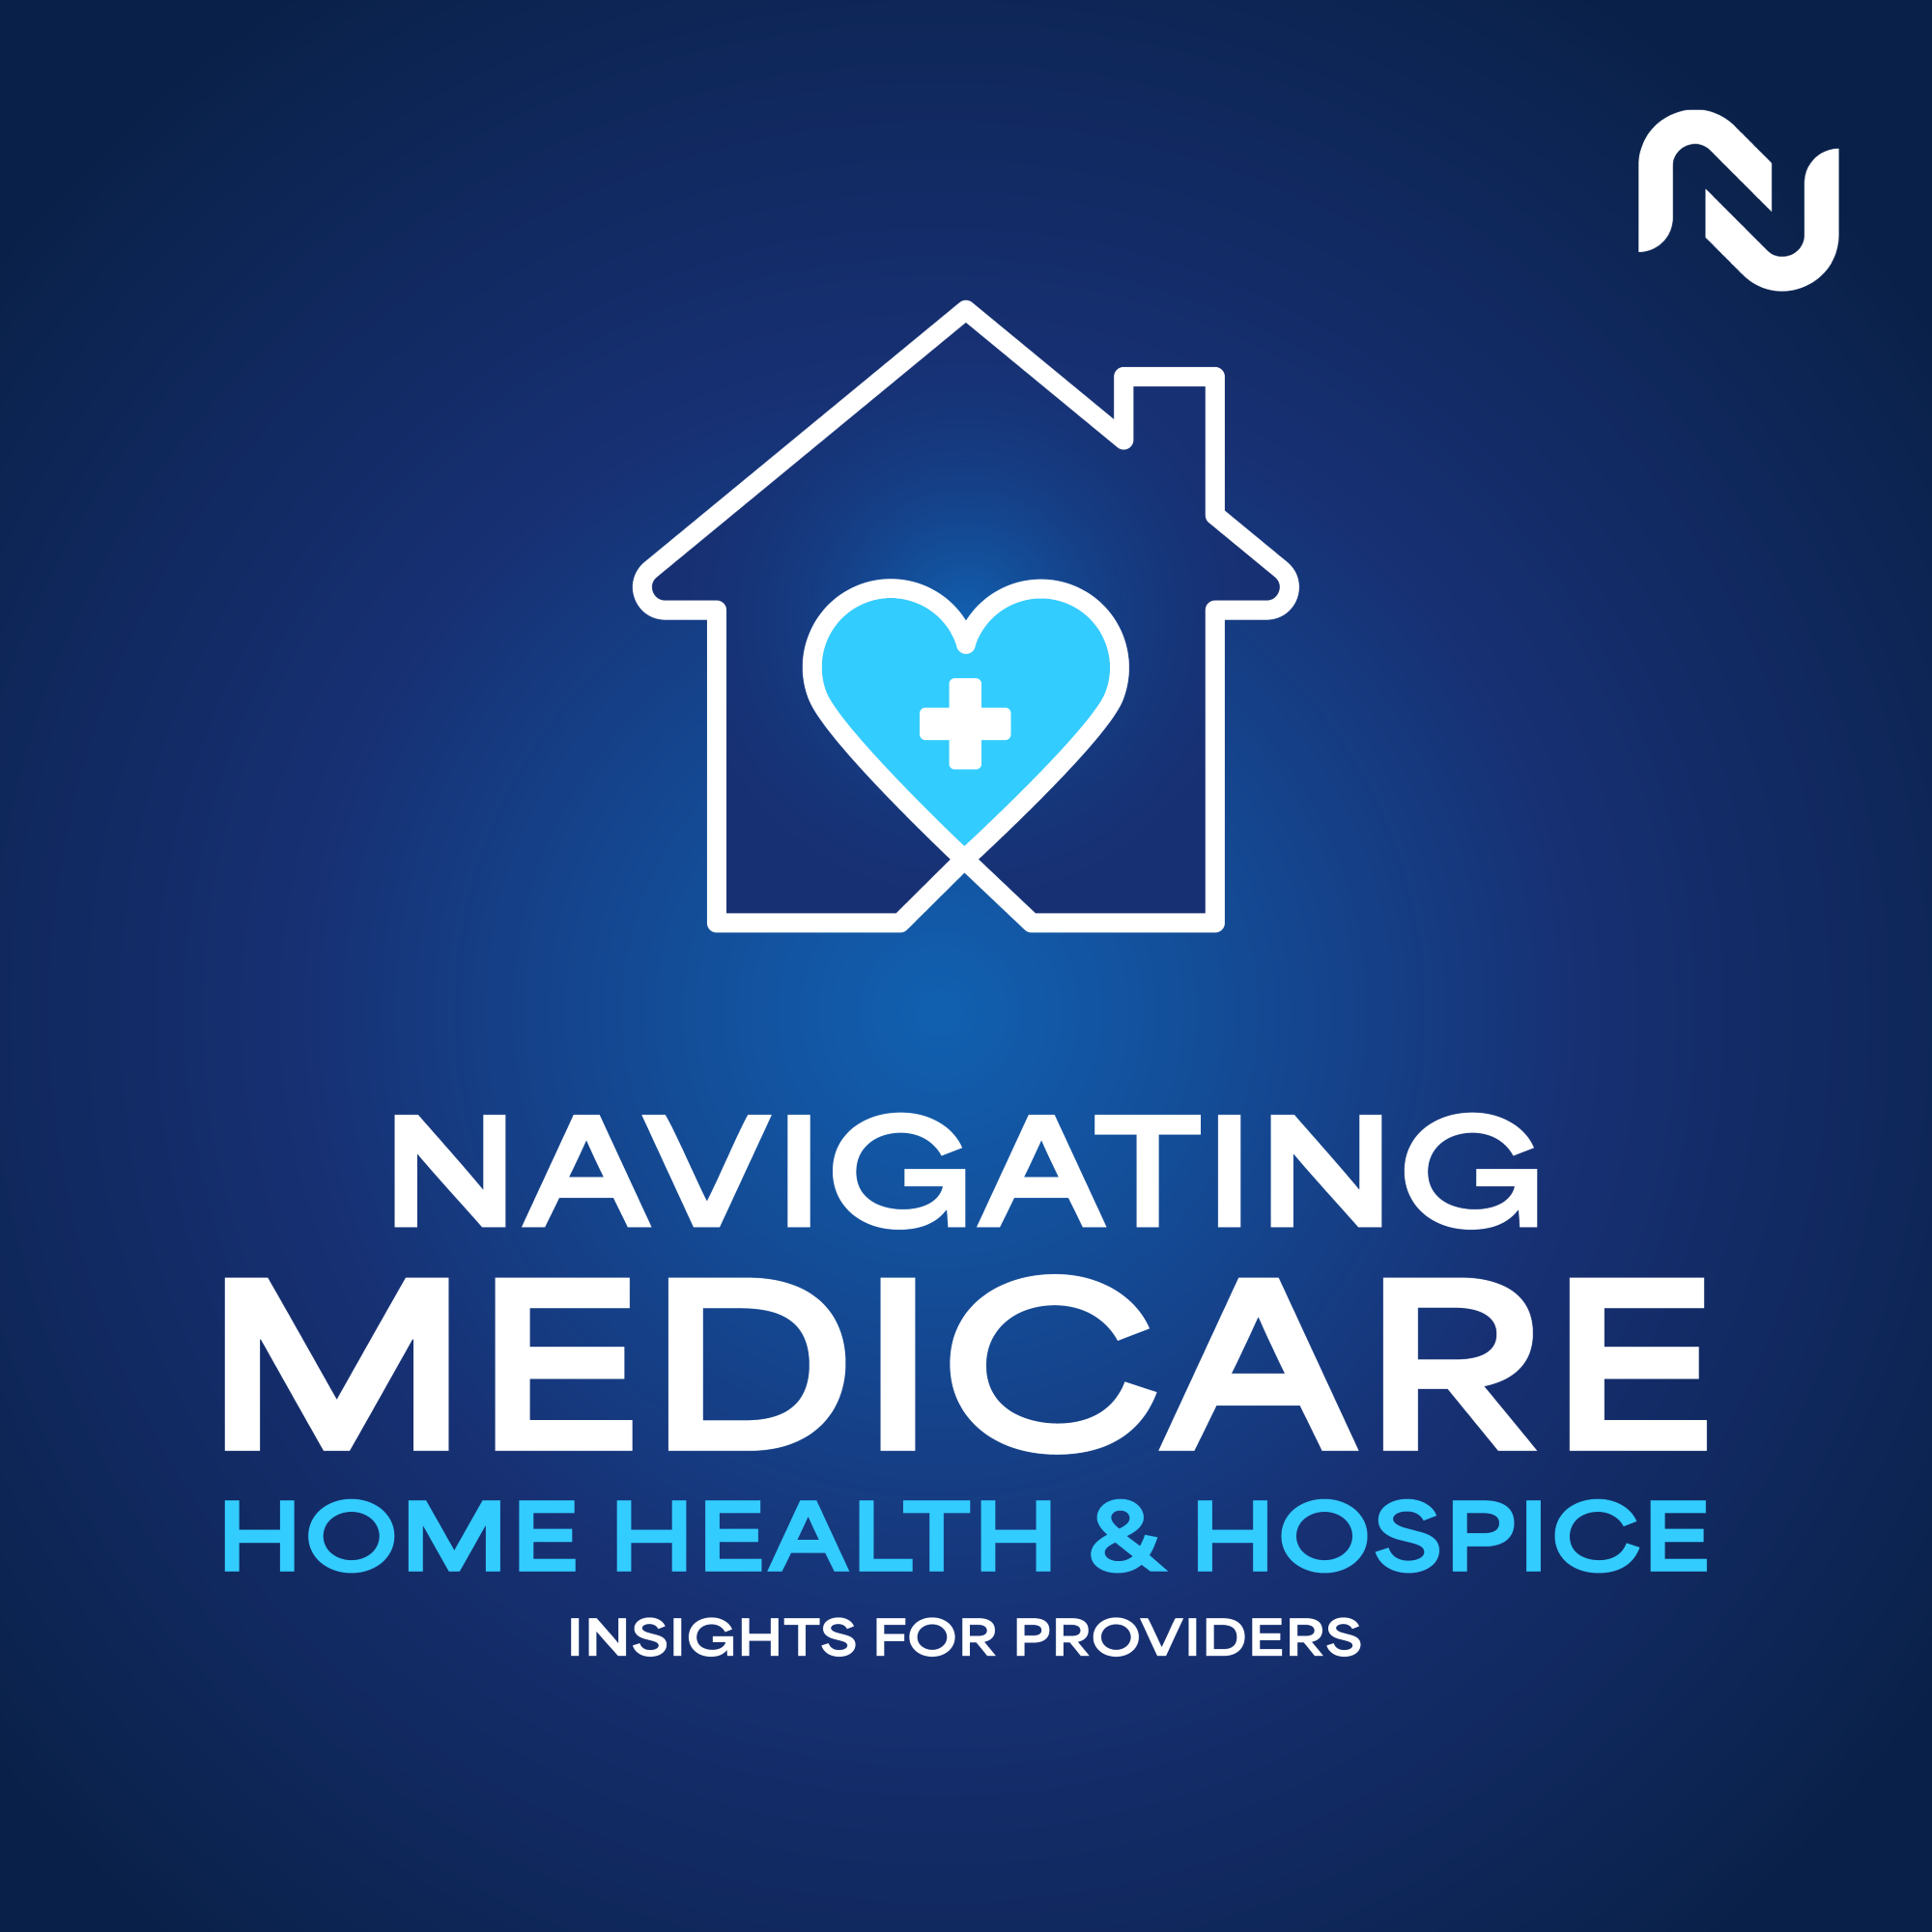 Navigating Medicare Home Health & Hospice Insight for Providers